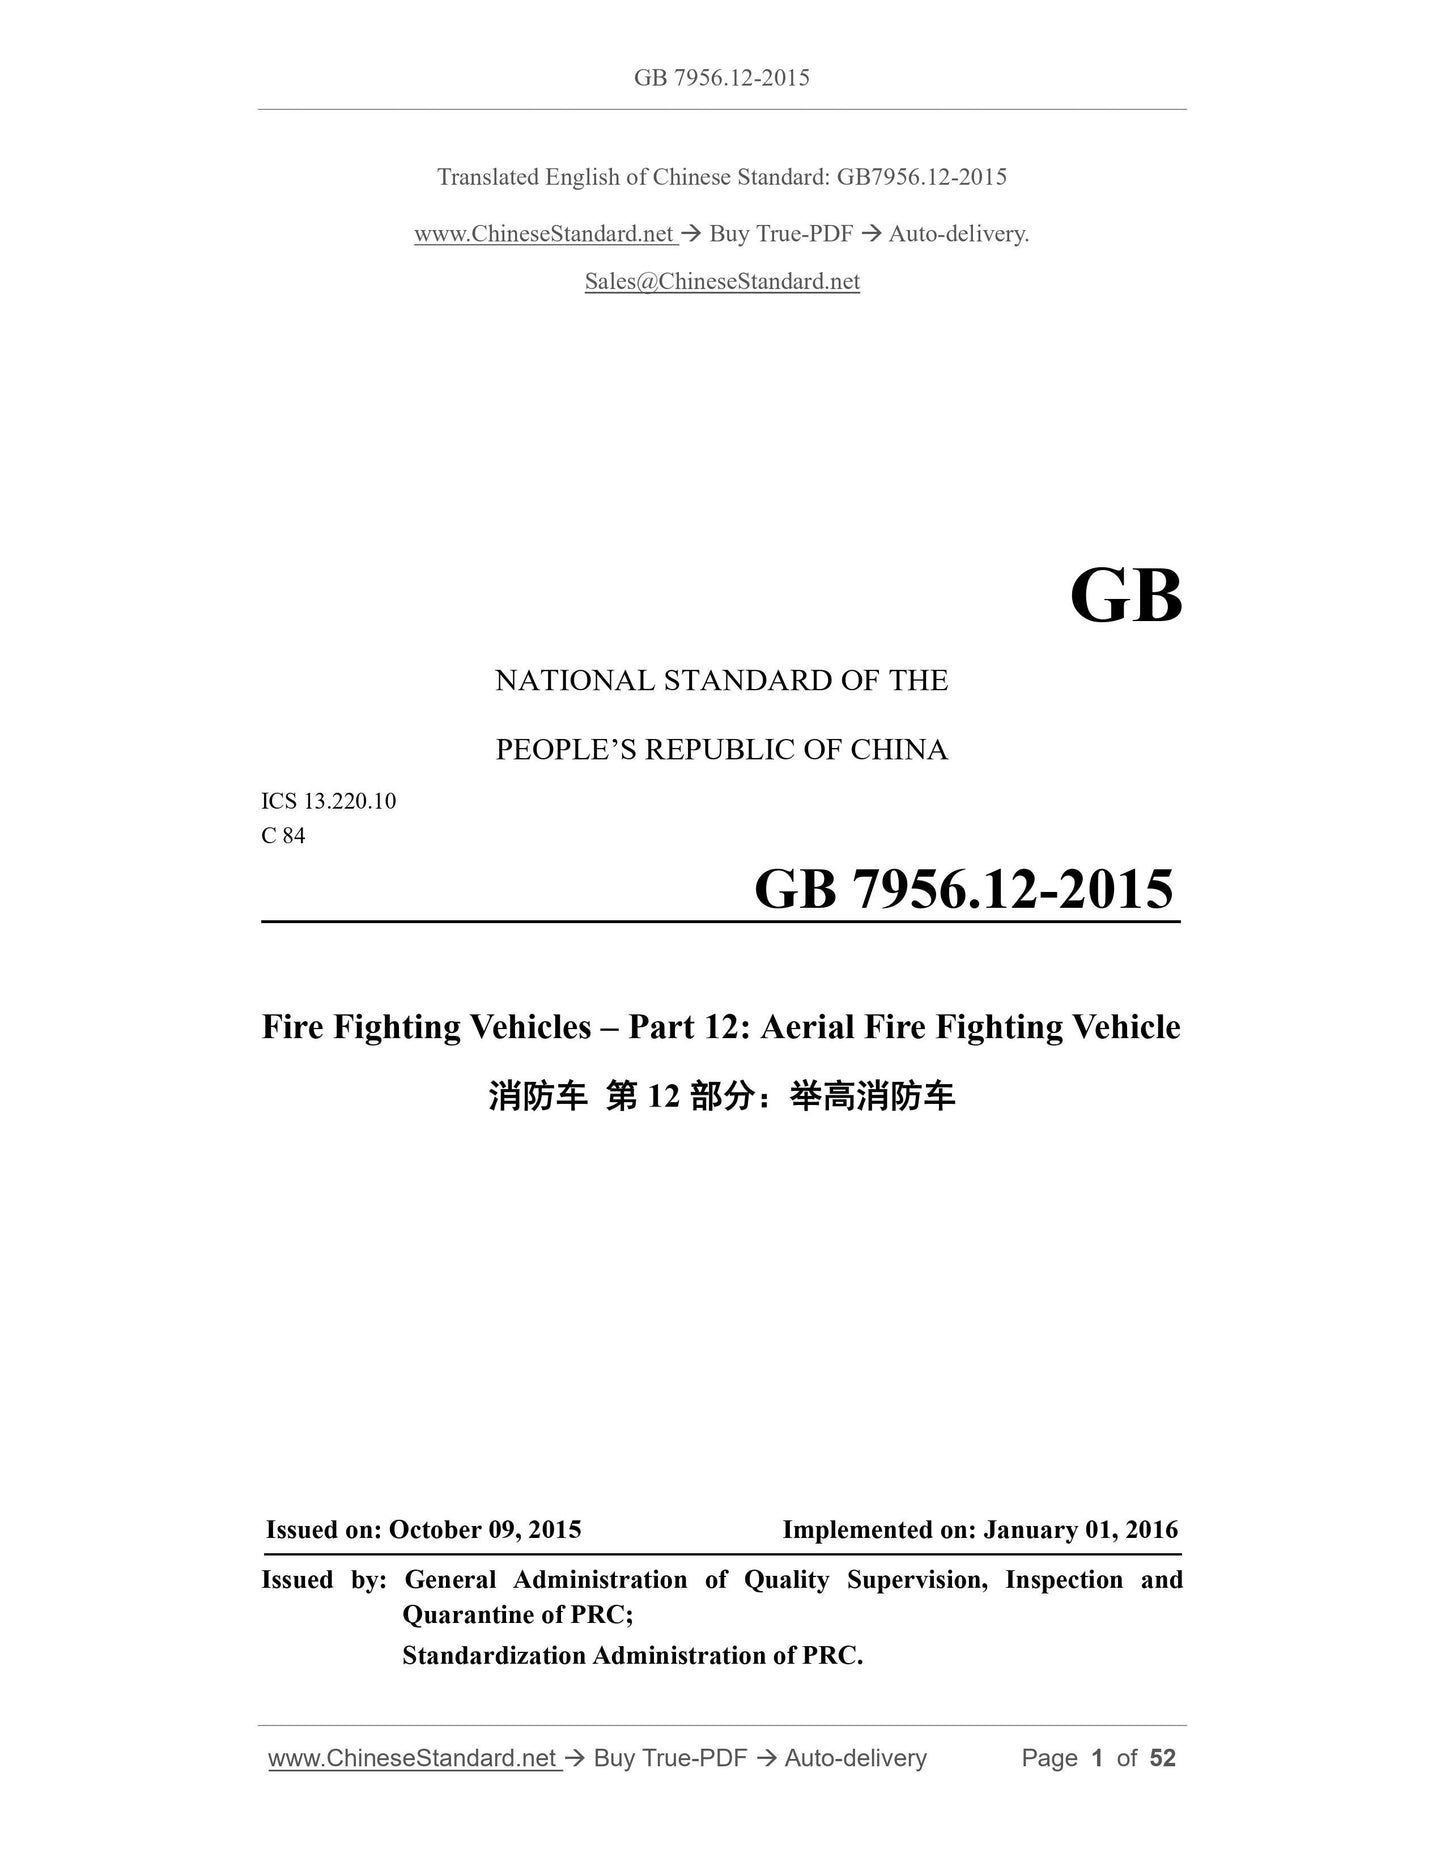 GB 7956.12-2015 Page 1